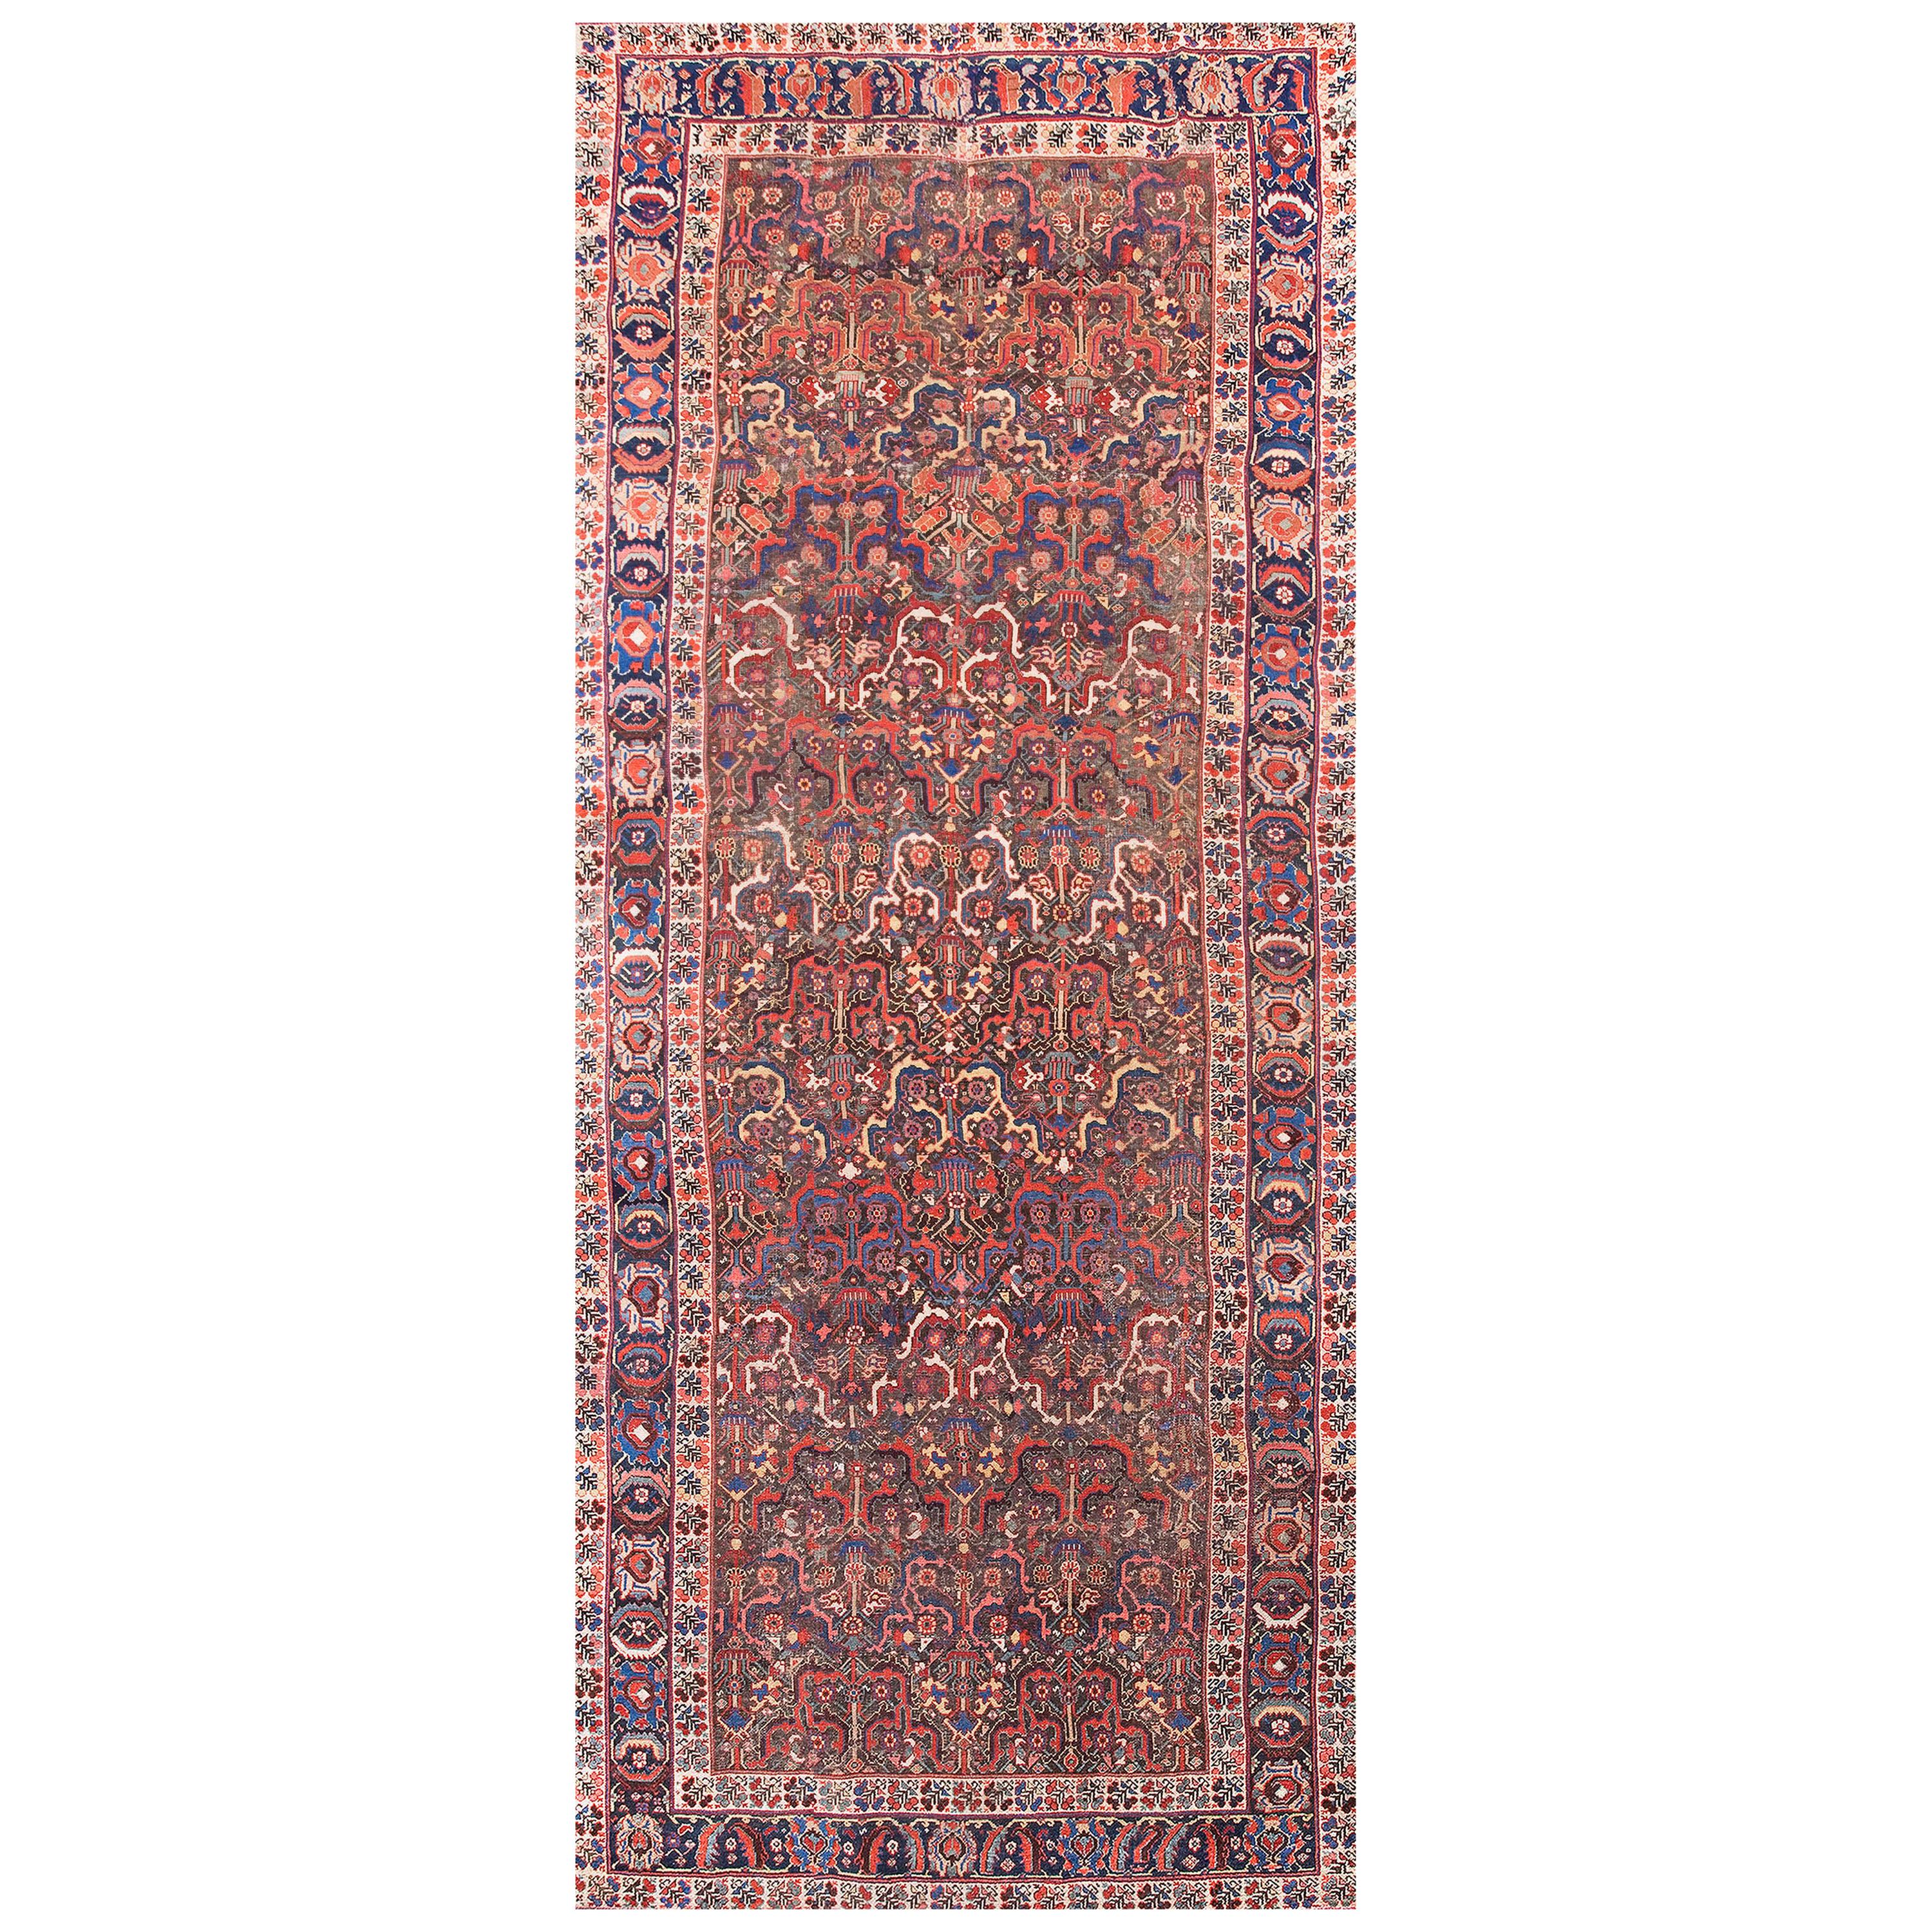 Late 18th Century N.W. Persian Gallery Carpet ( 6'4"x 15'8" - 193 x 478 ) For Sale